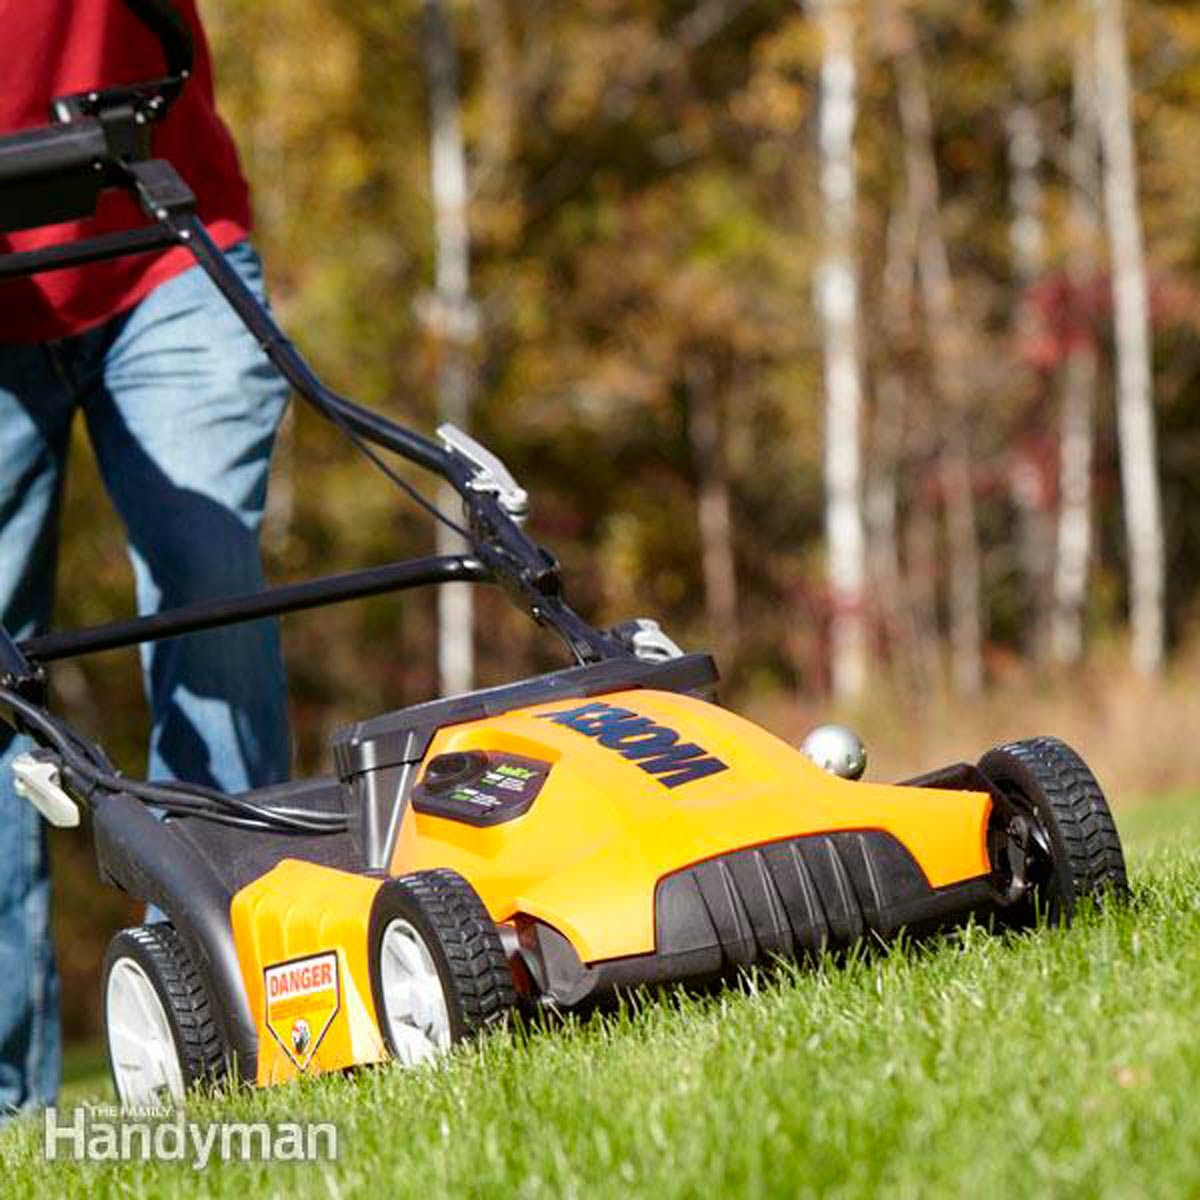 7 Organic Lawn Care Tips to Try This Year